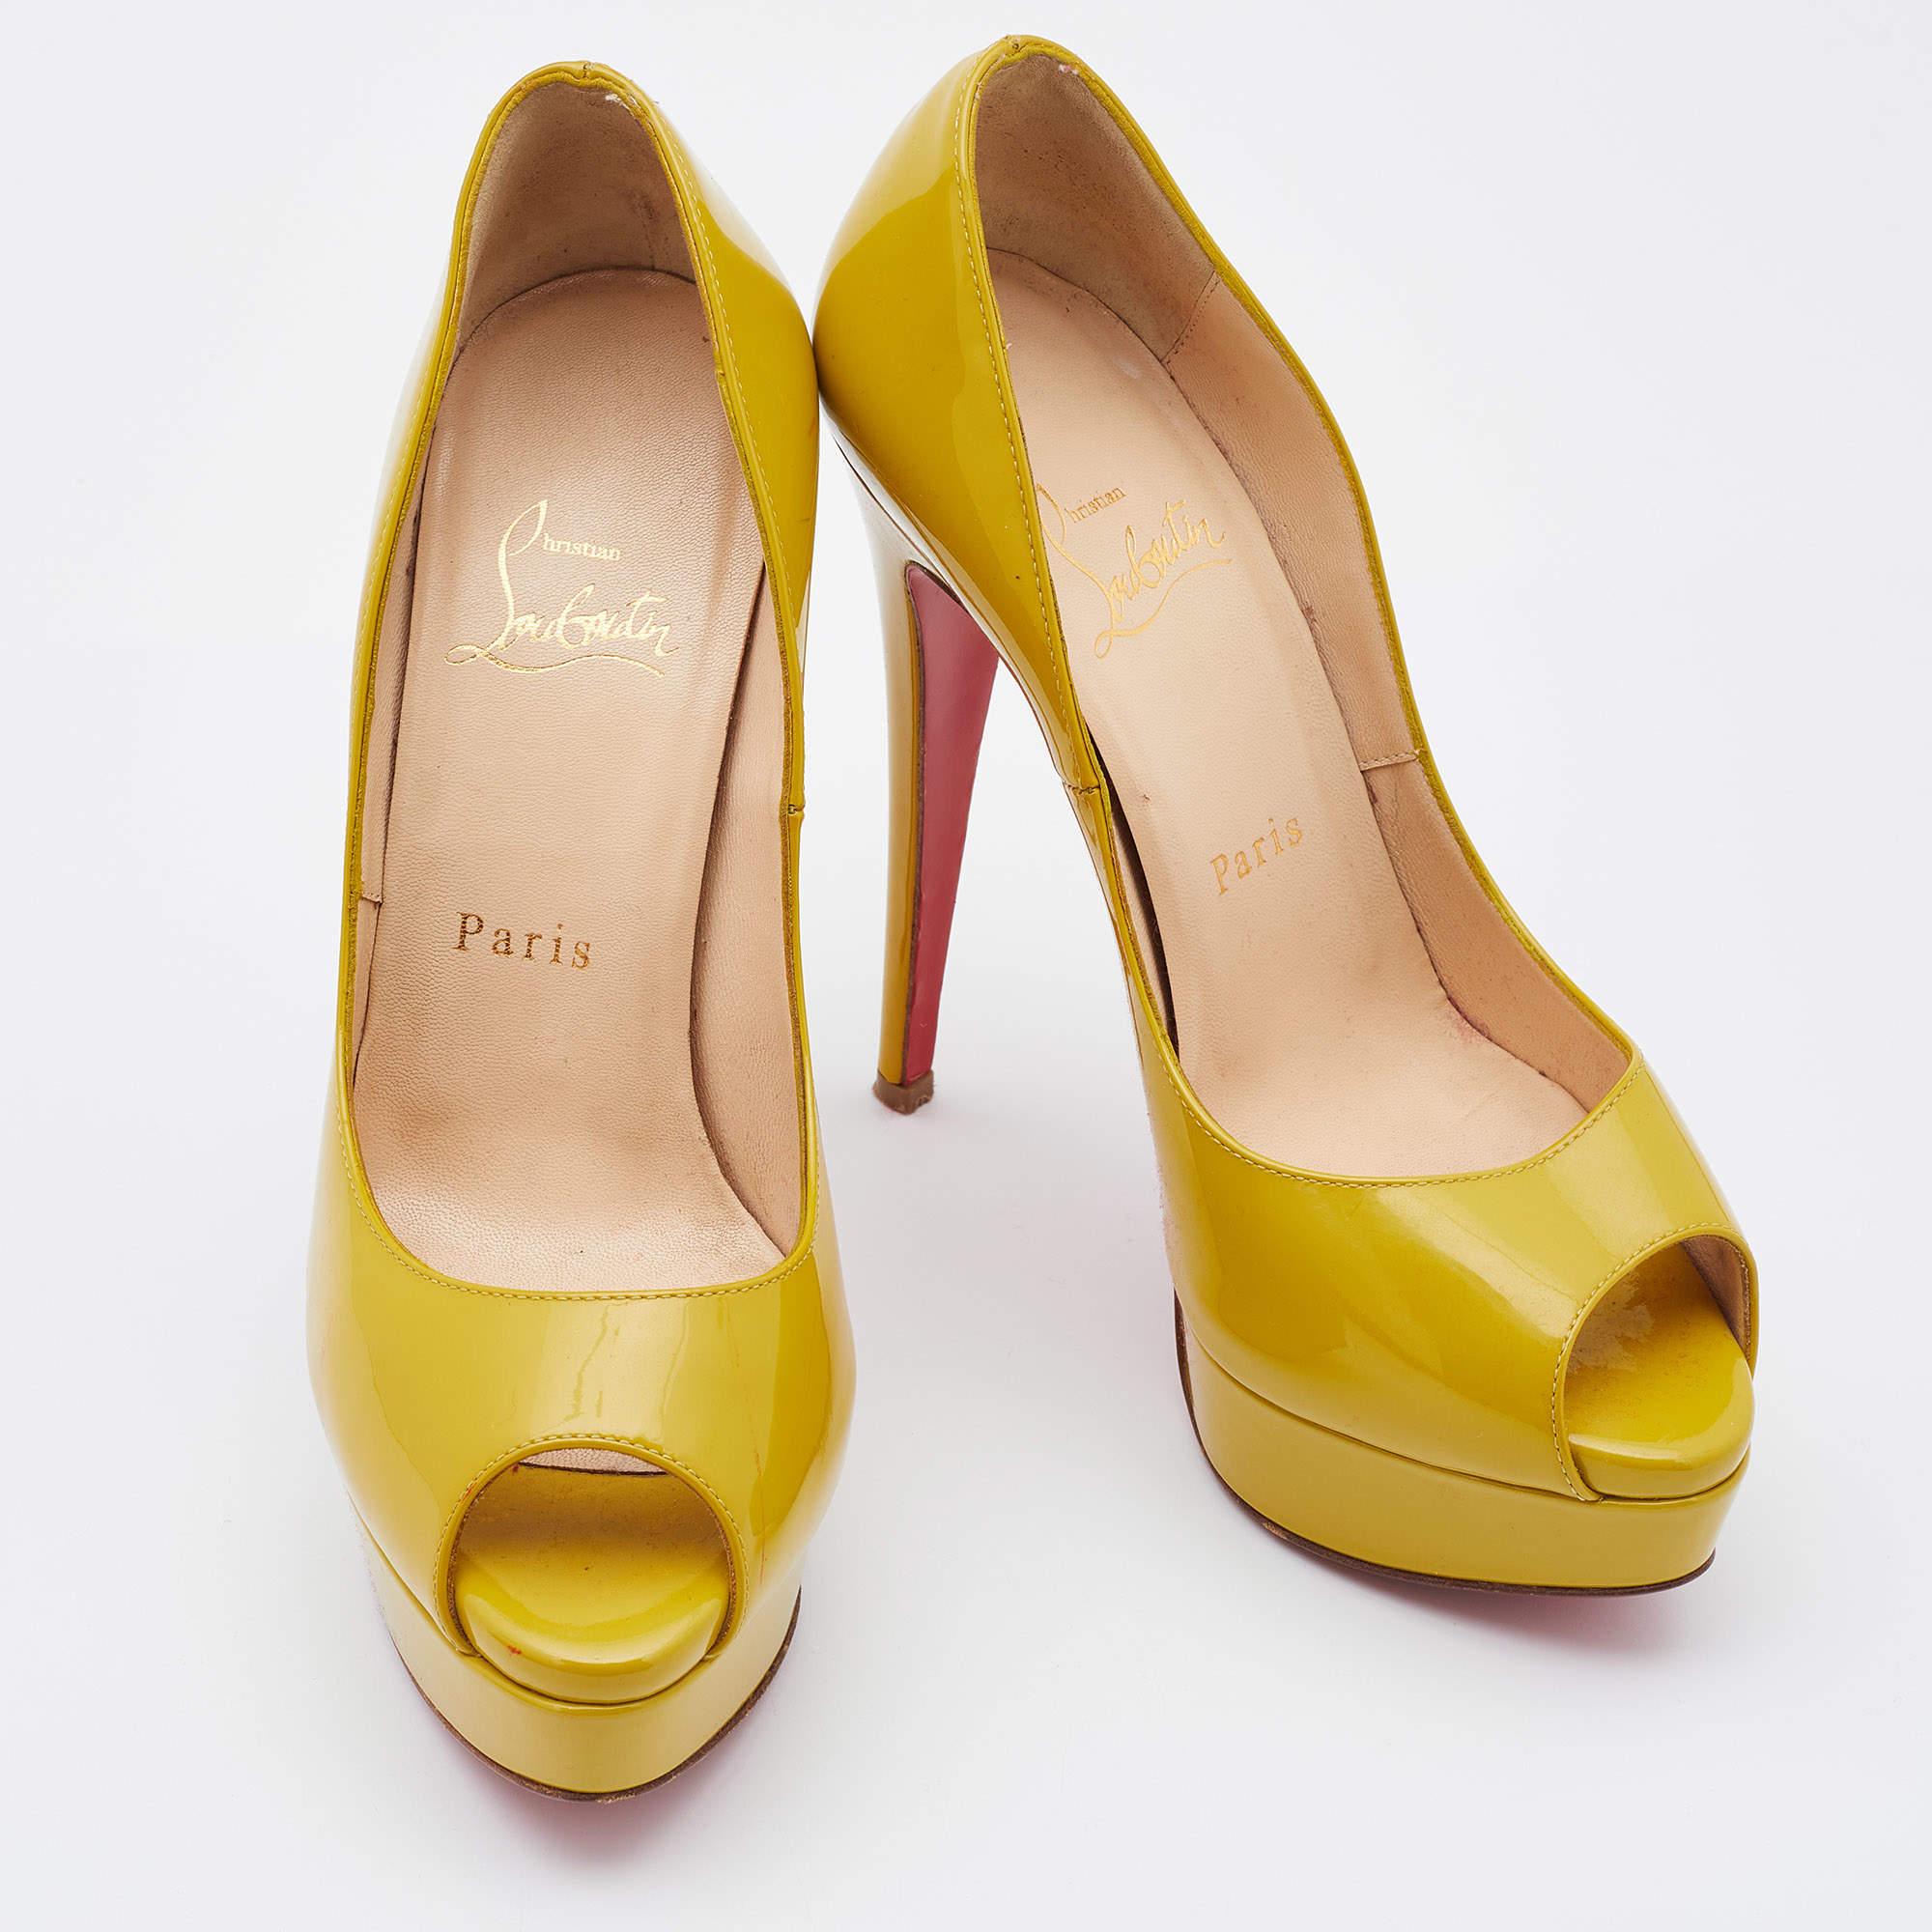 Exhibit an elegant style with this pair of pumps. These branded shoes for women are crafted from quality materials. They are set on durable soles and sleek heels.

